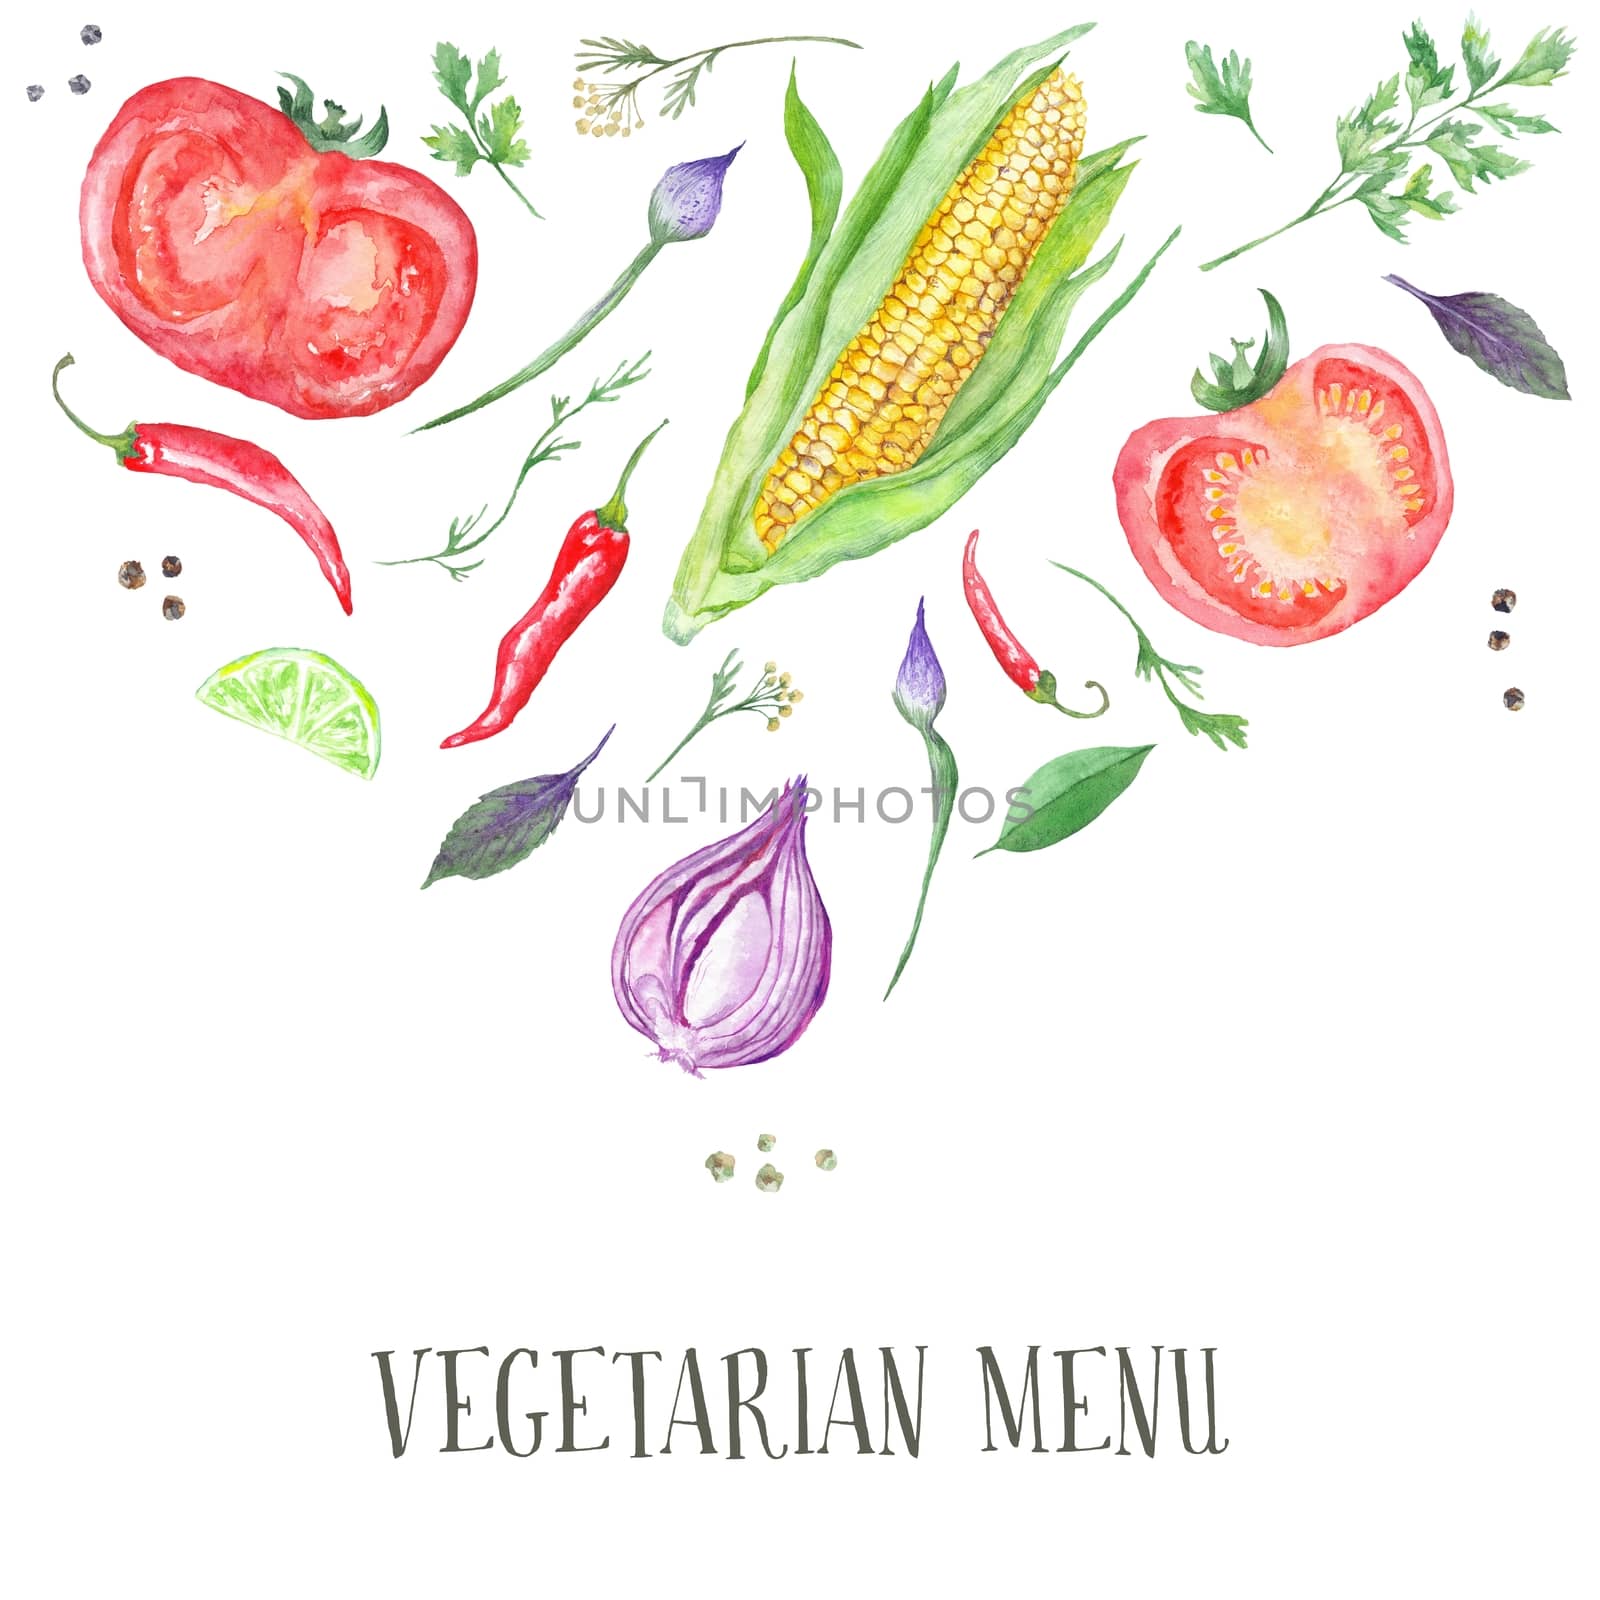 Hand-painted watercolor illustration with veggie food ingredients isolated on white background